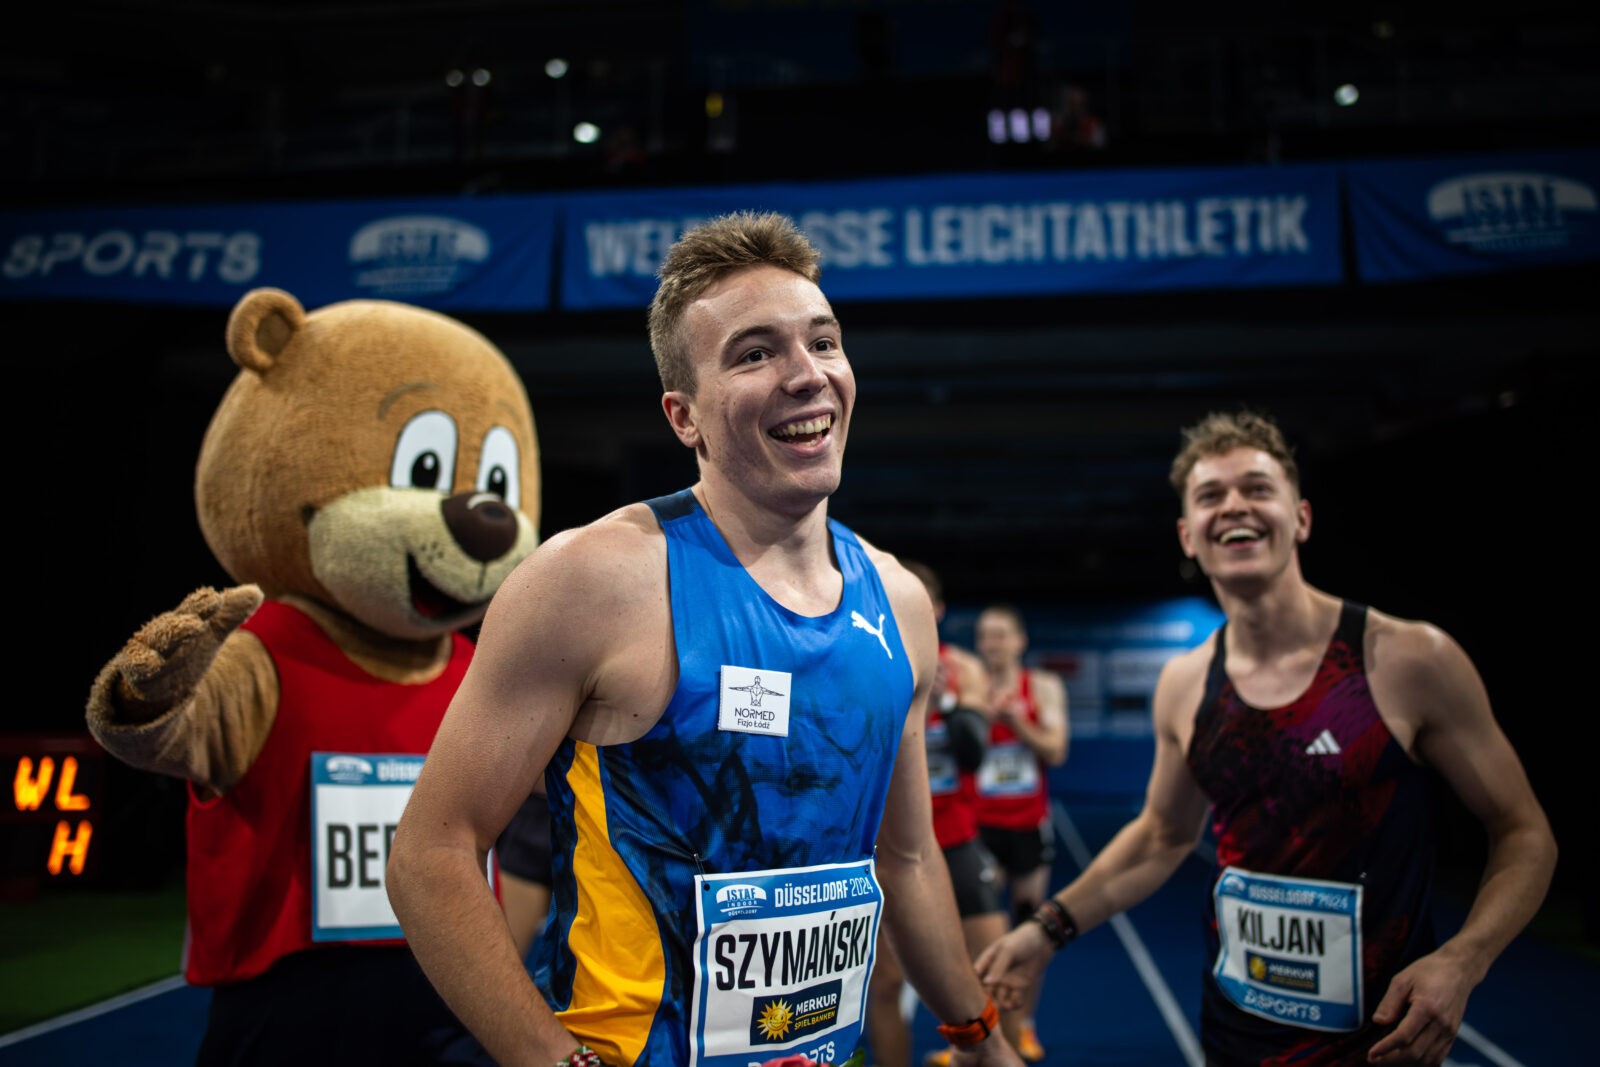 More than 6,300 fans celebrated a magnificent athletics festival in Düsseldorf